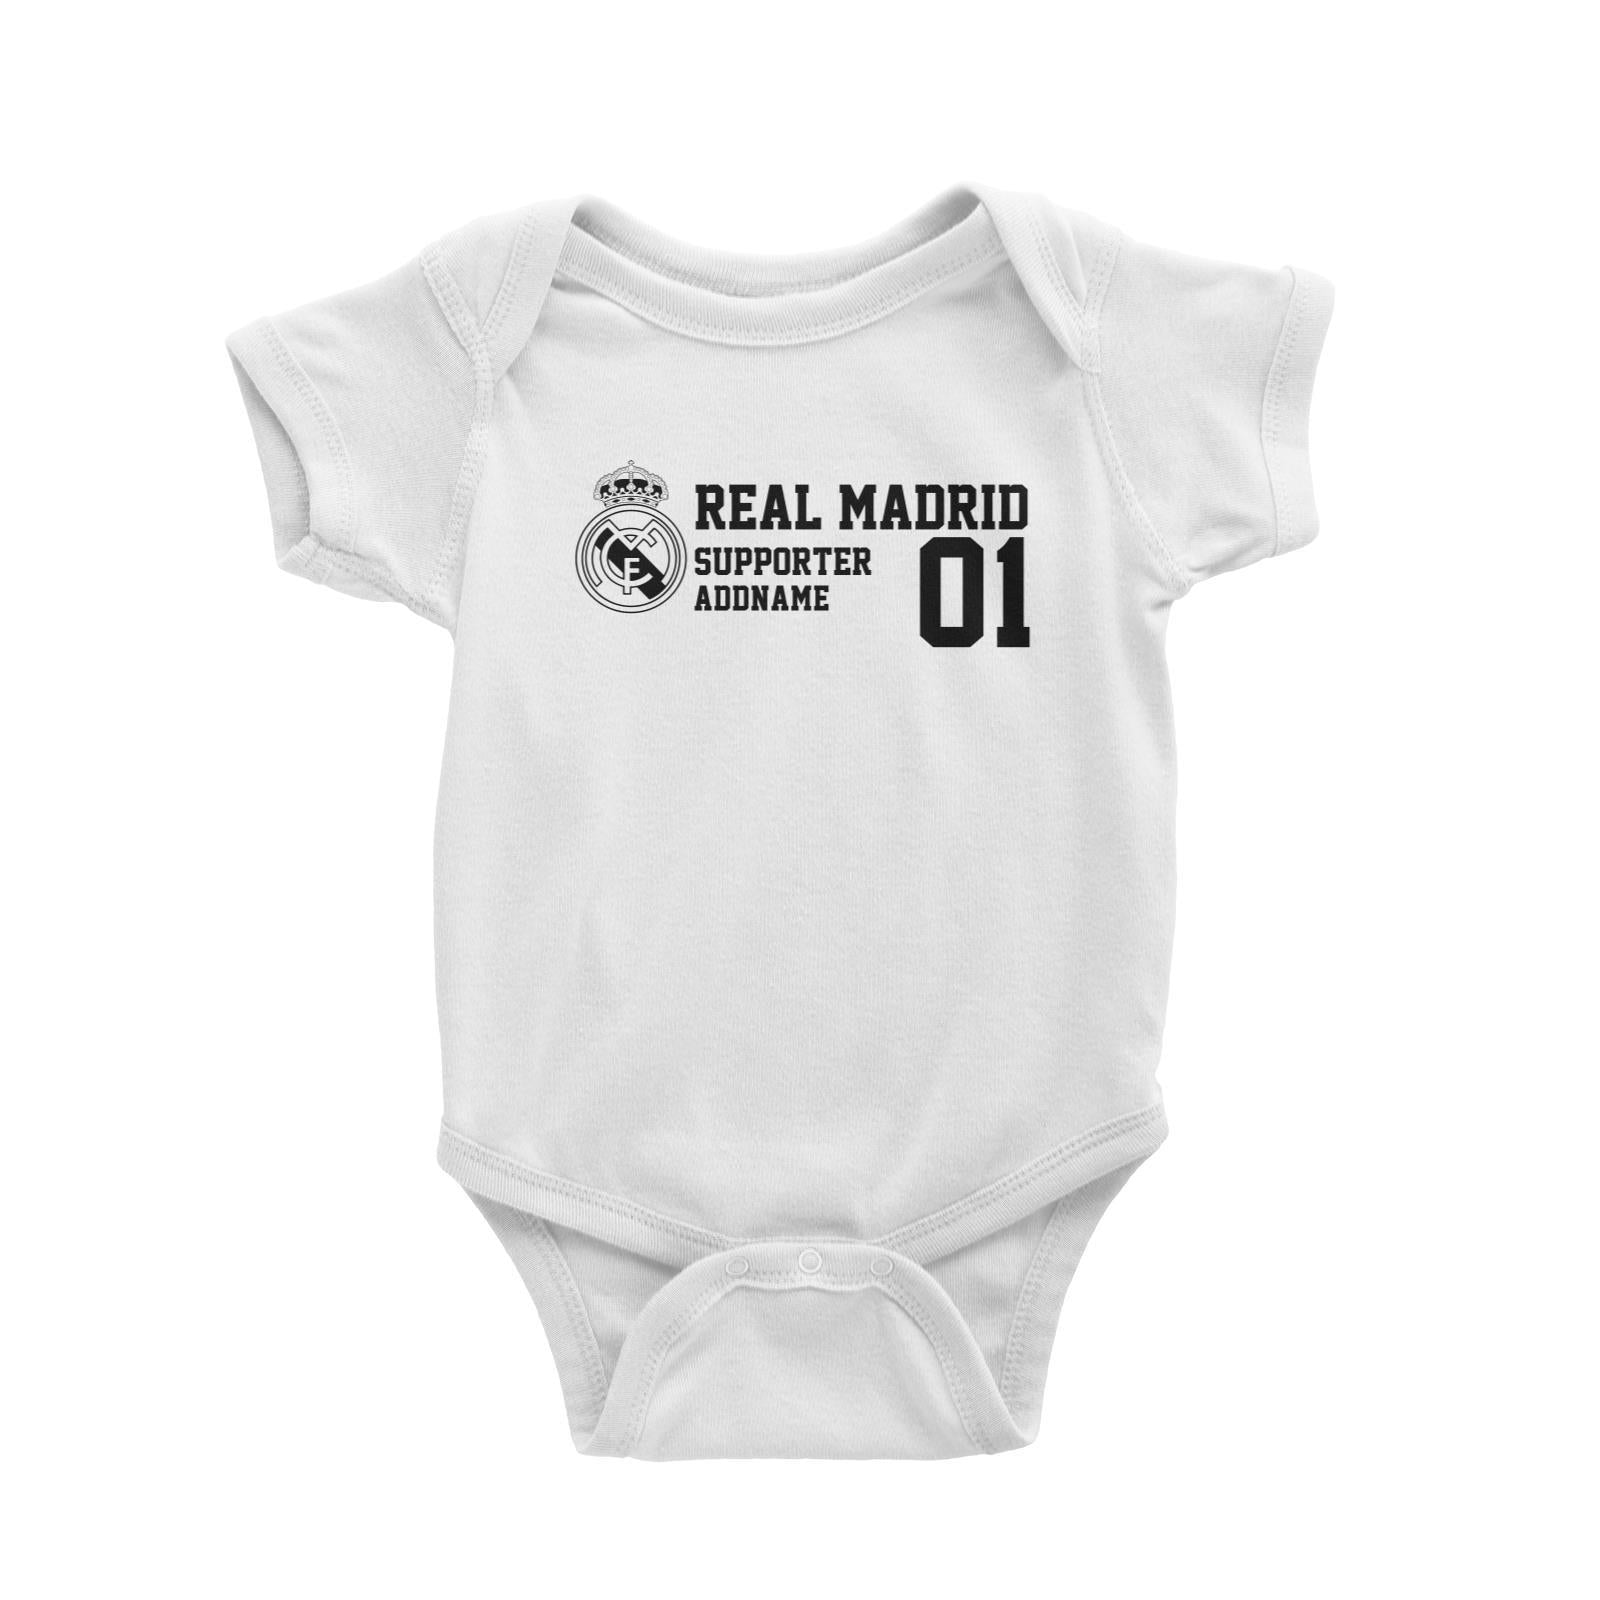 Real Madrid Football Supporter Addname Baby Romper